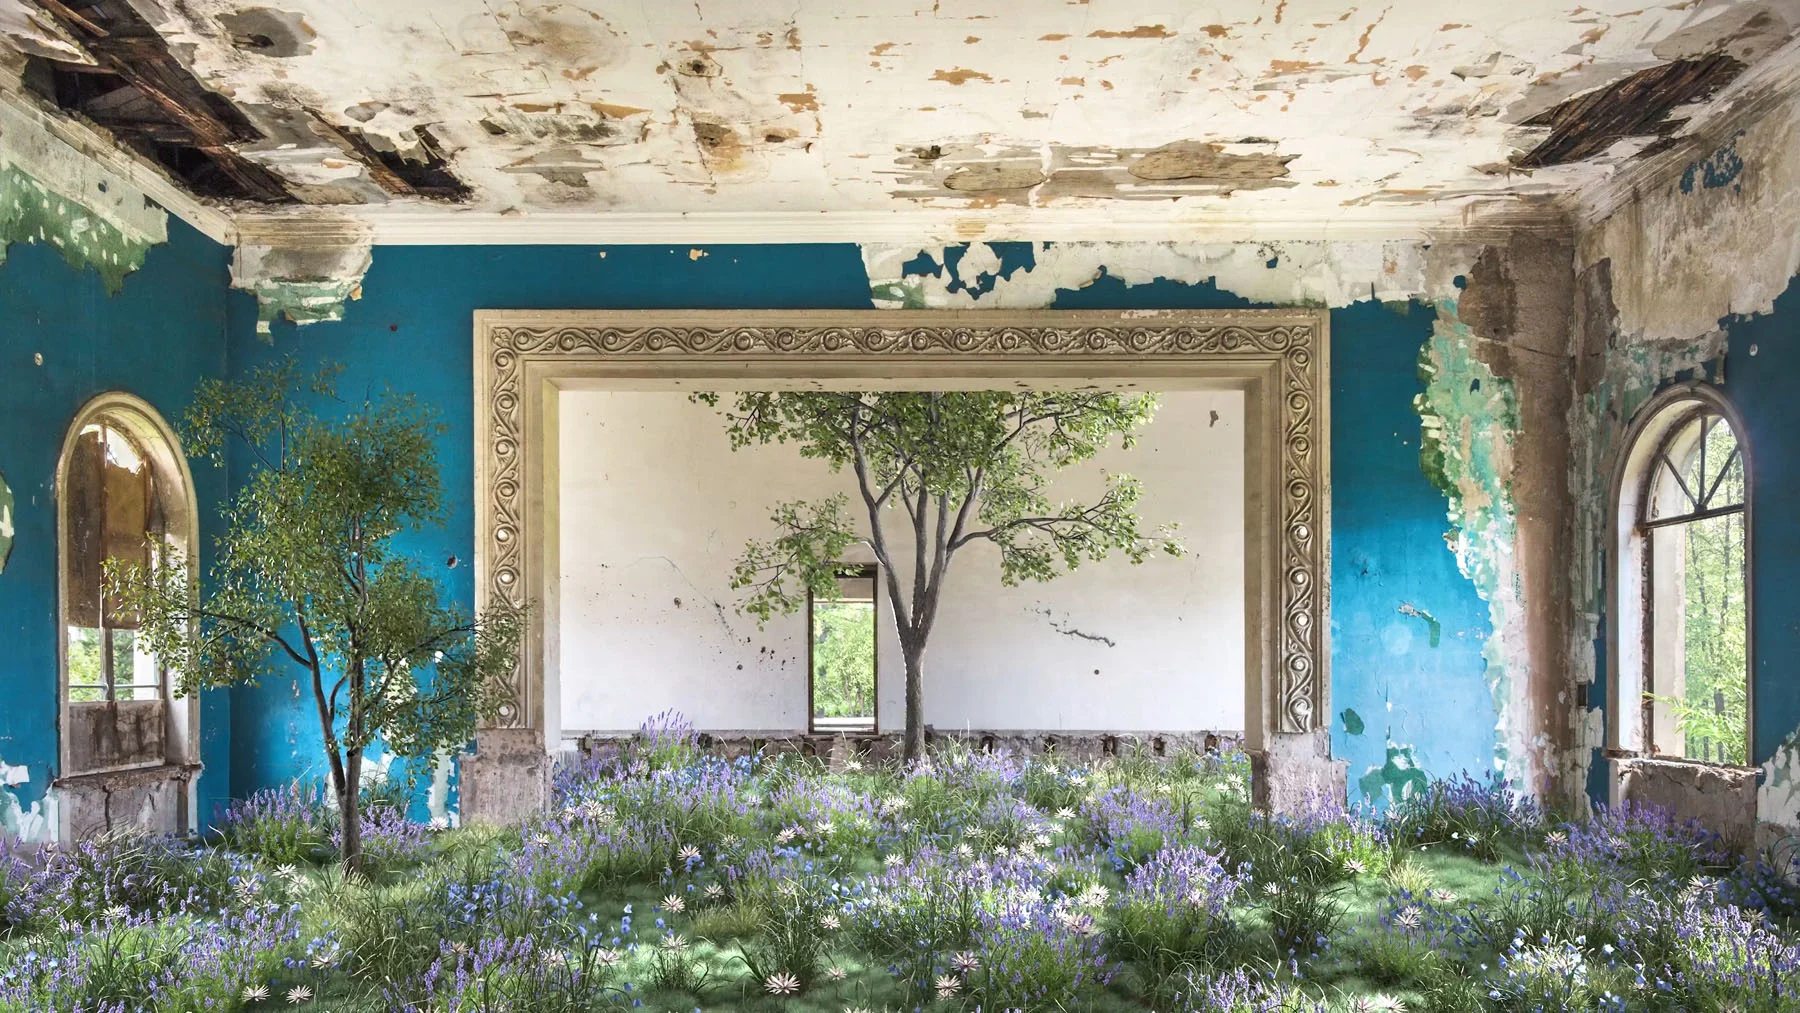 A mixed-media video—created using photography and 3D techniques—of a blue abandoned building located in Georgia, overgrown with plants, flowers and a tree.
